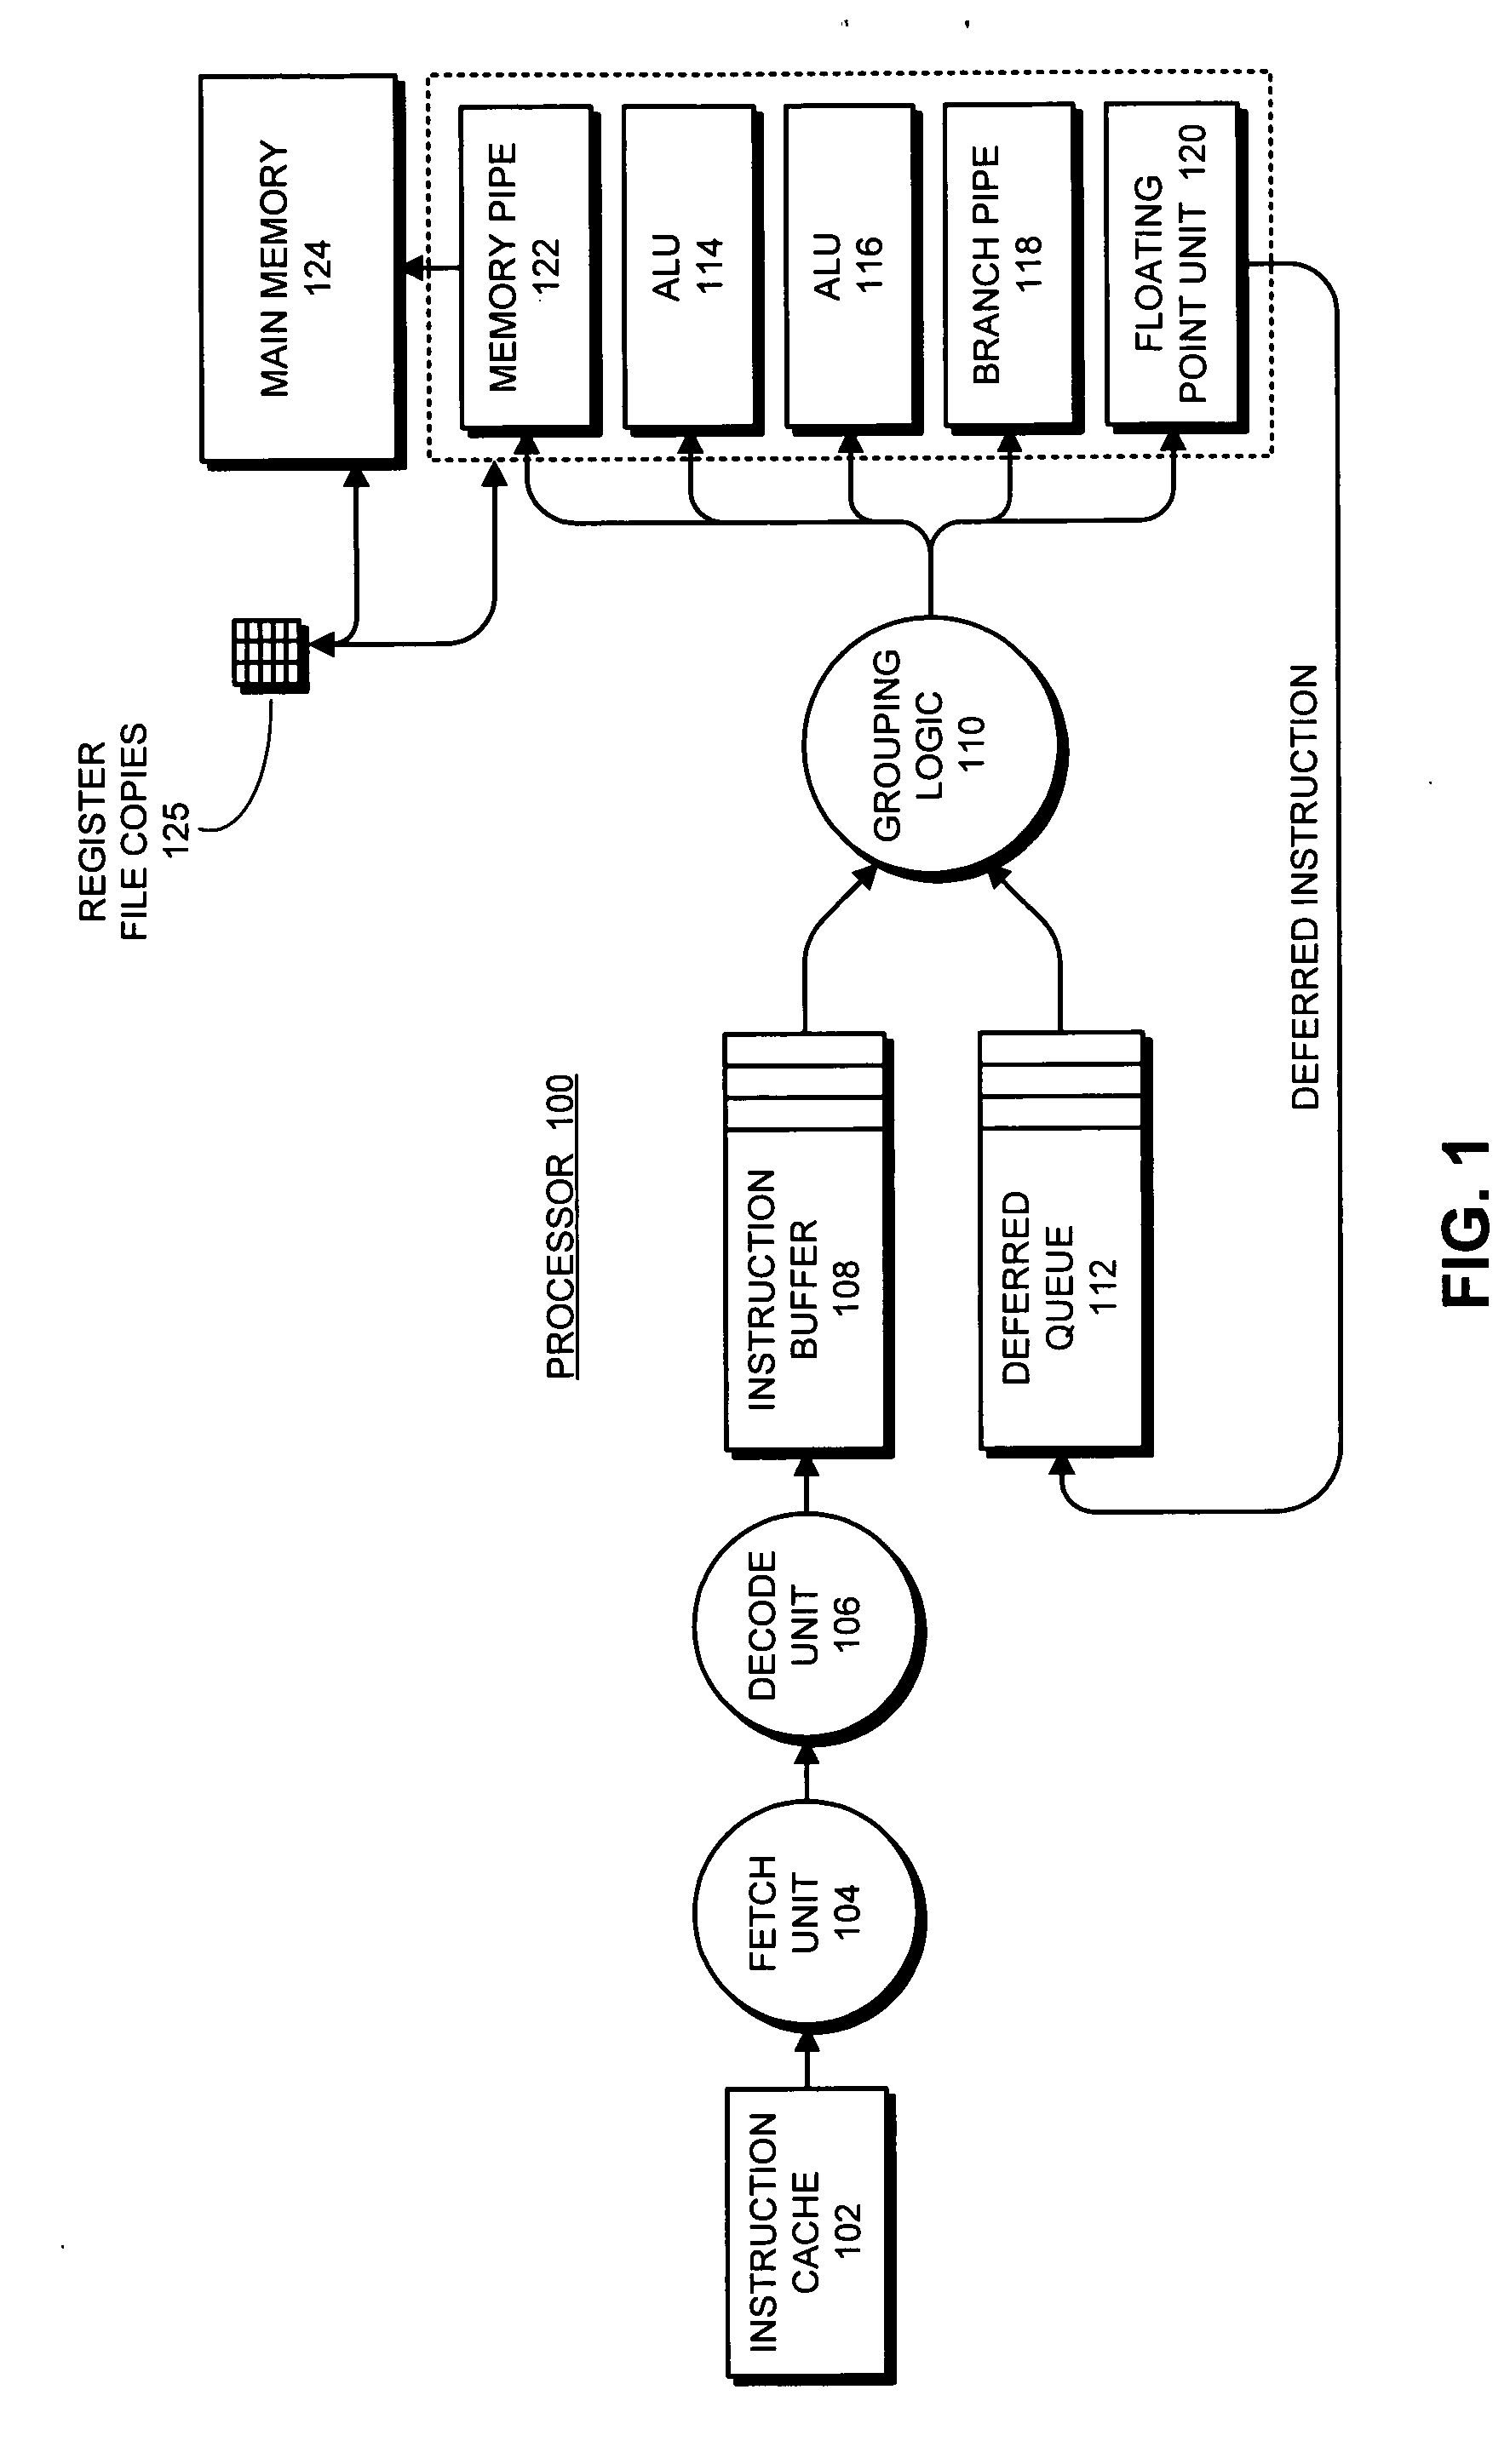 Generation of multiple checkpoints in a processor that supports speculative execution